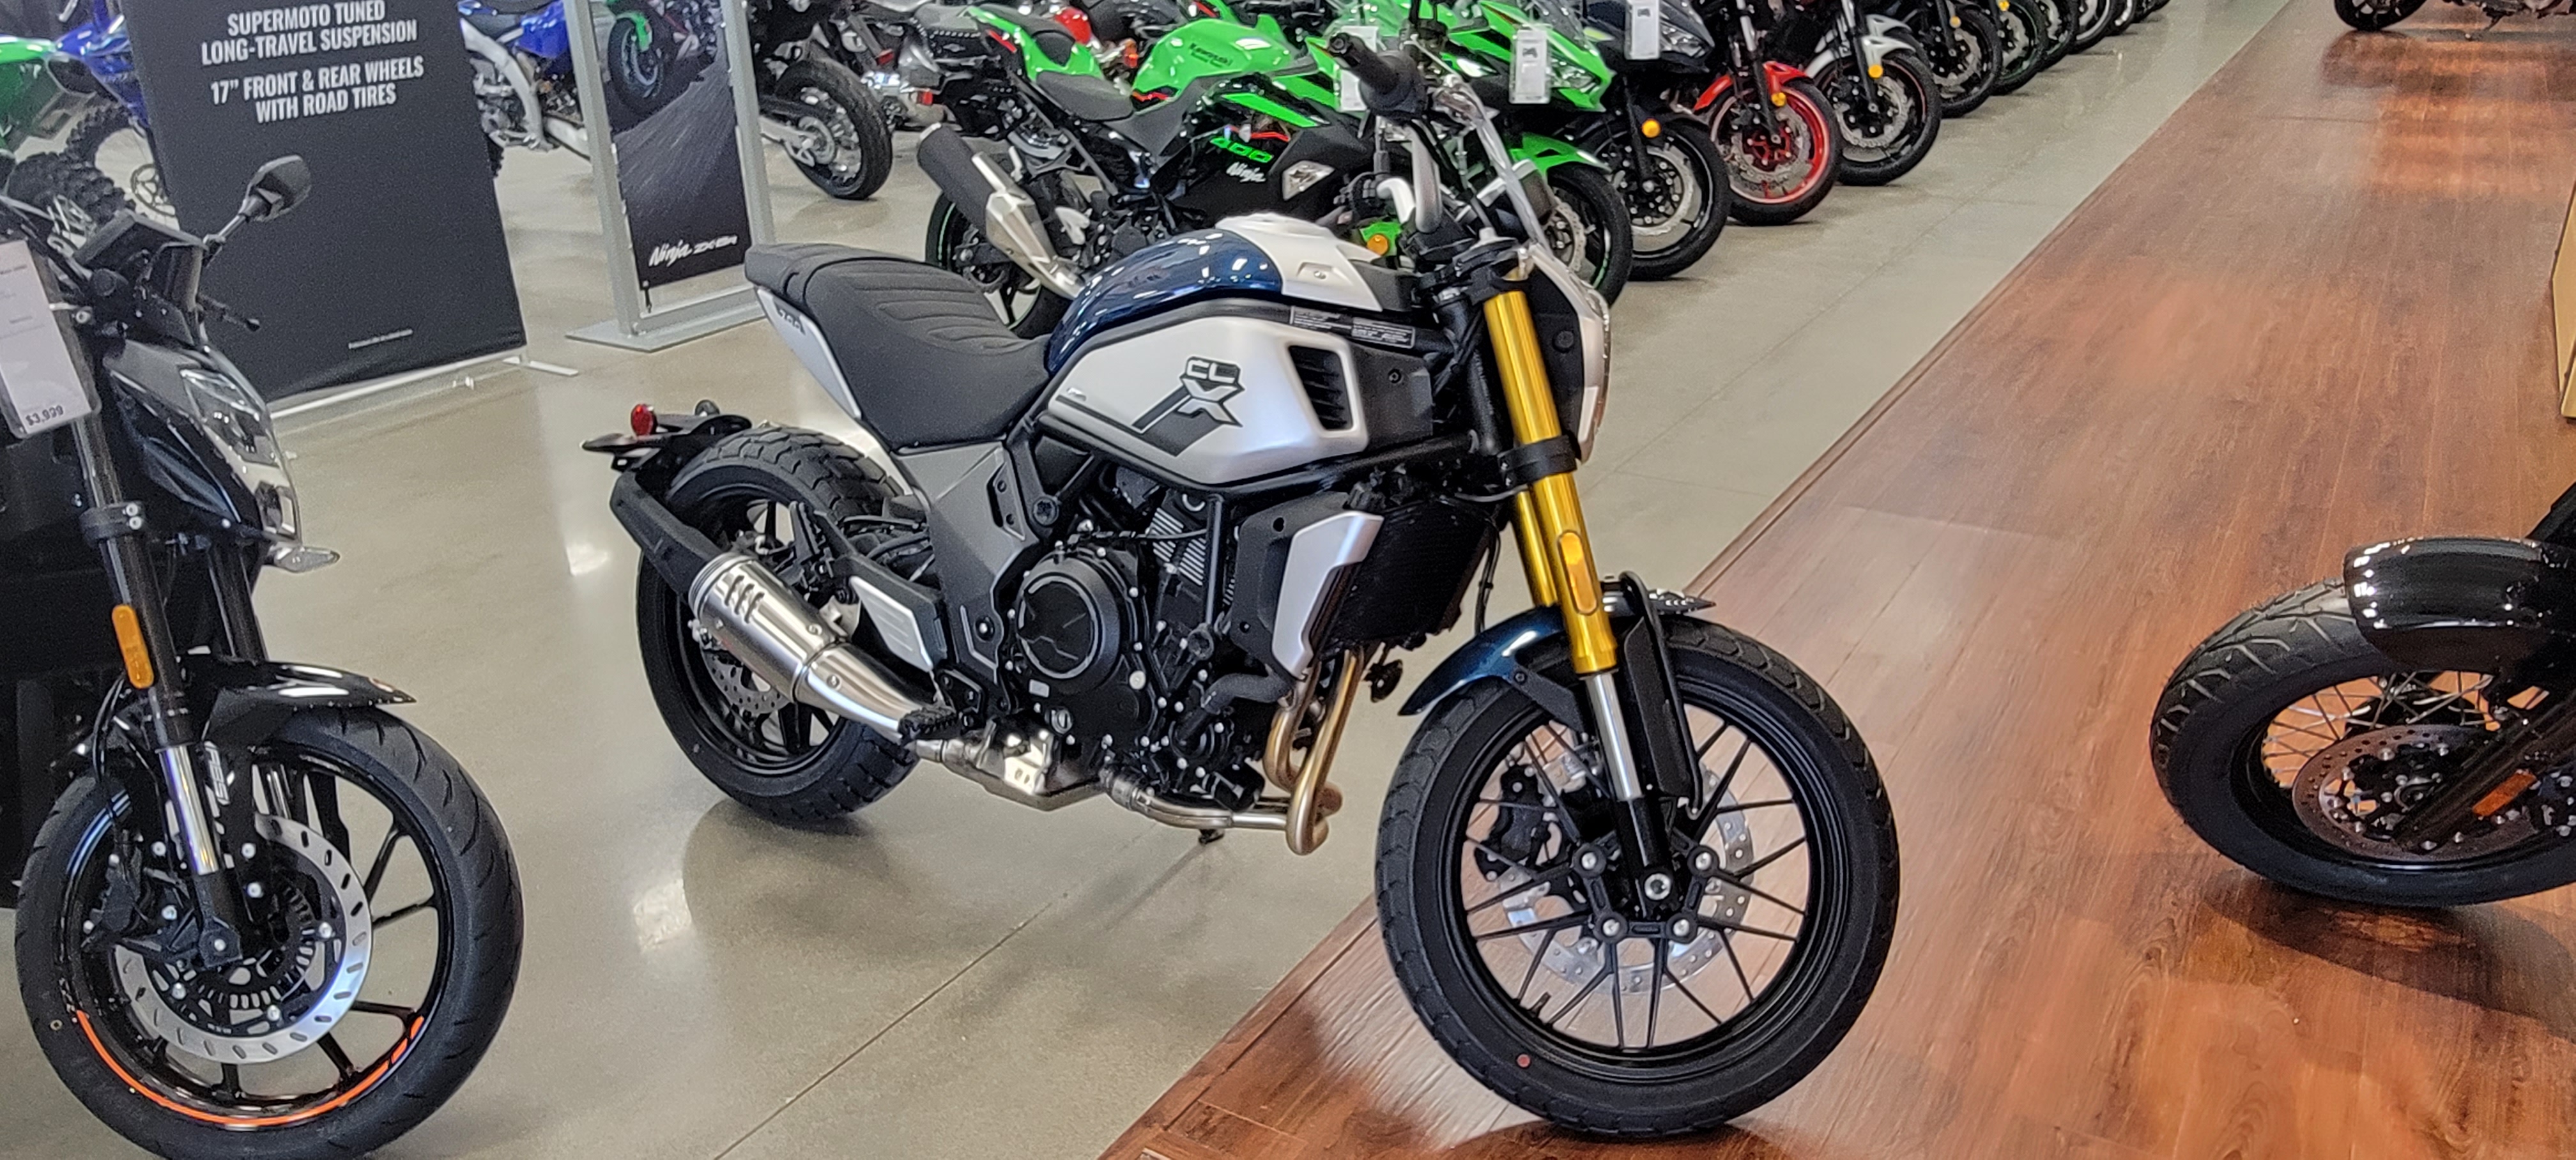 2022 CFMoto 700CL-X at Brenny's Motorcycle Clinic, Bettendorf, IA 52722